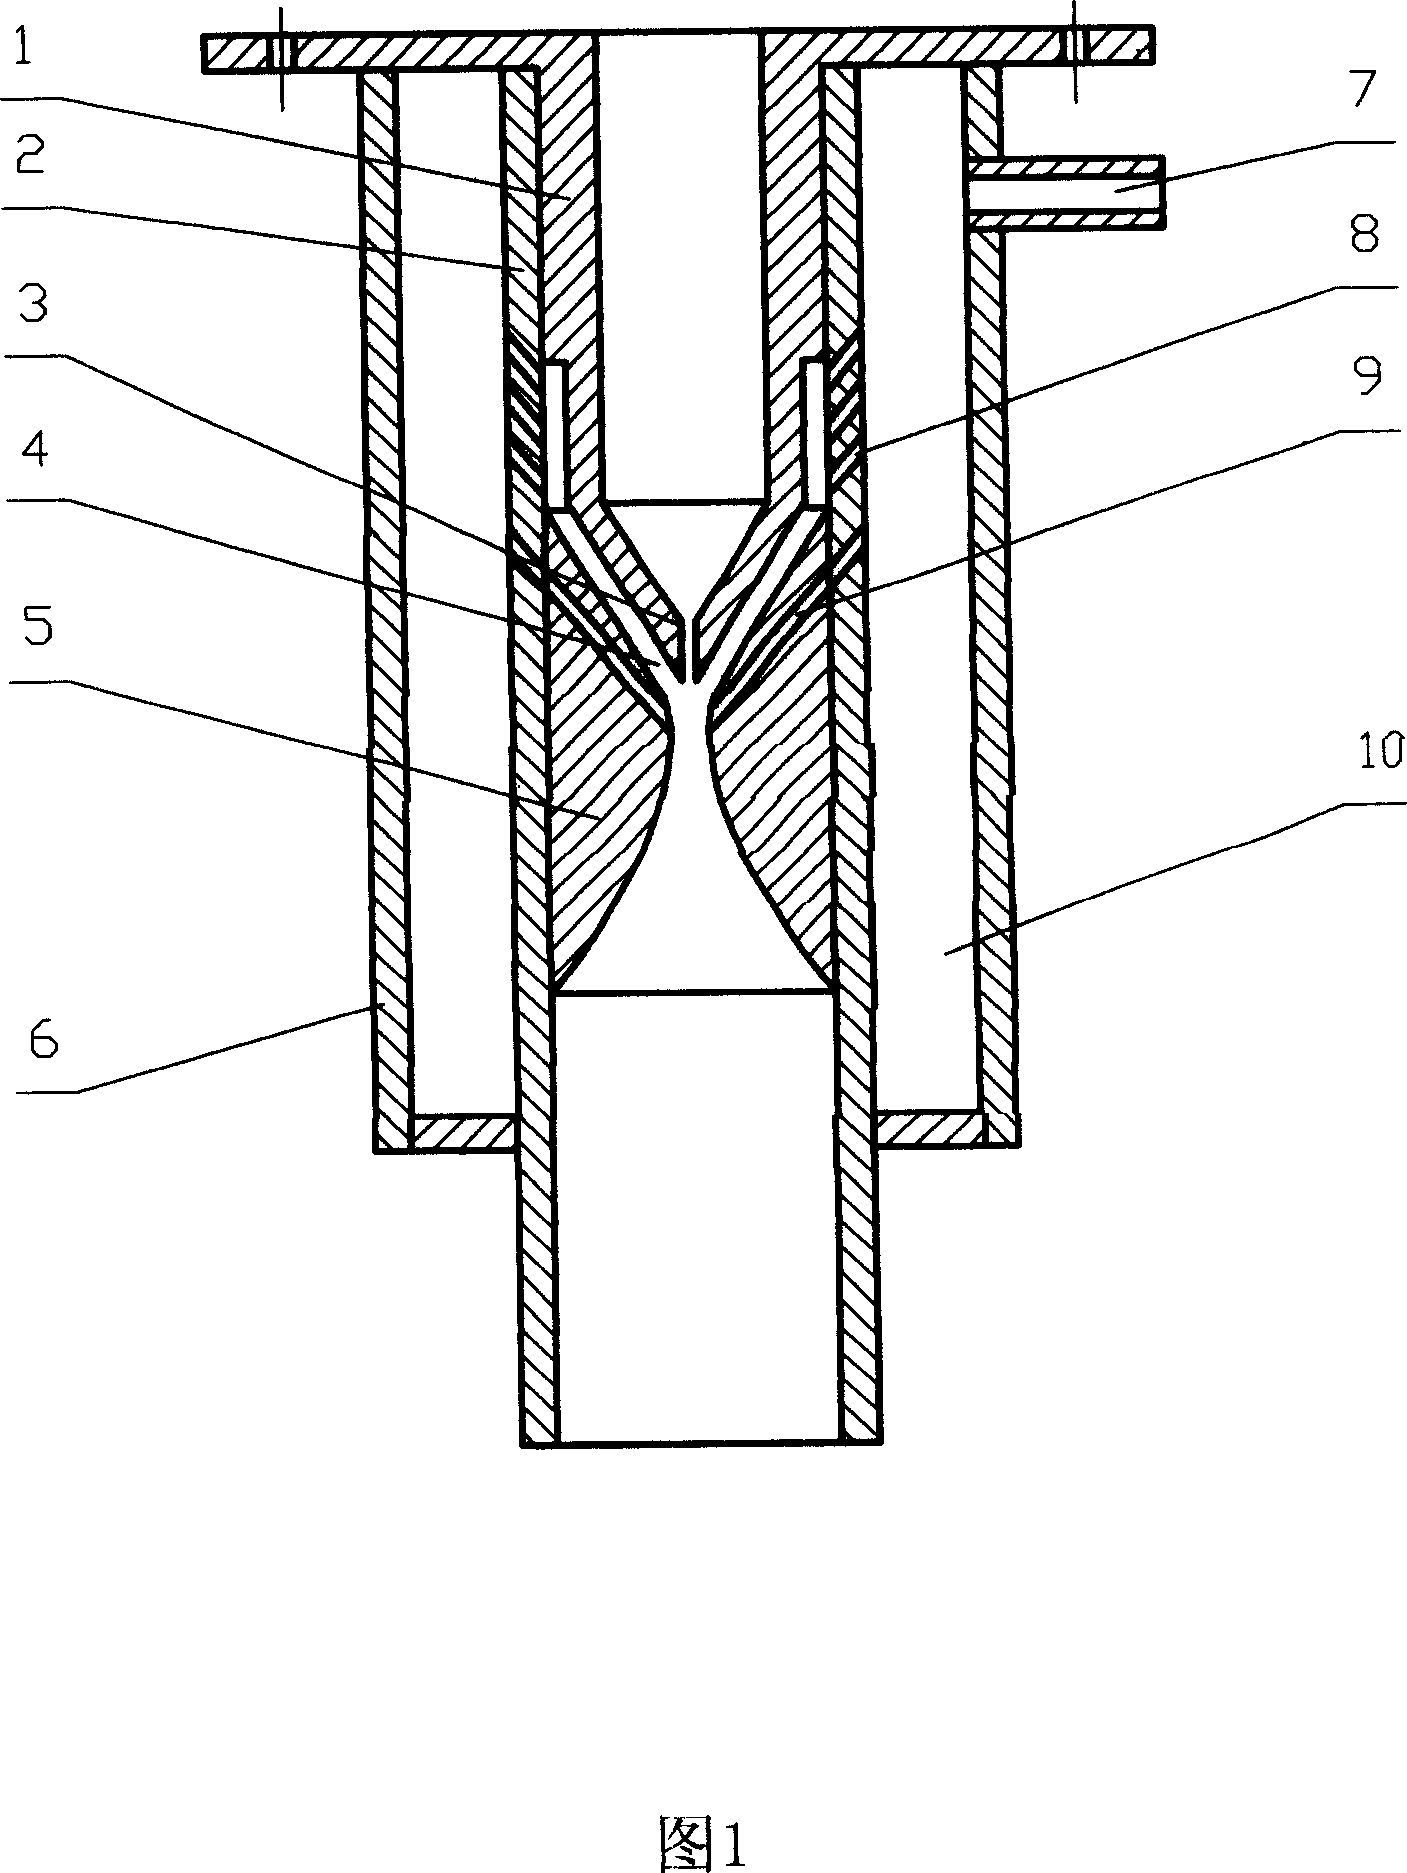 Self-sucking type nozzle in two phases of gas-fluid with structure of convex circular ring